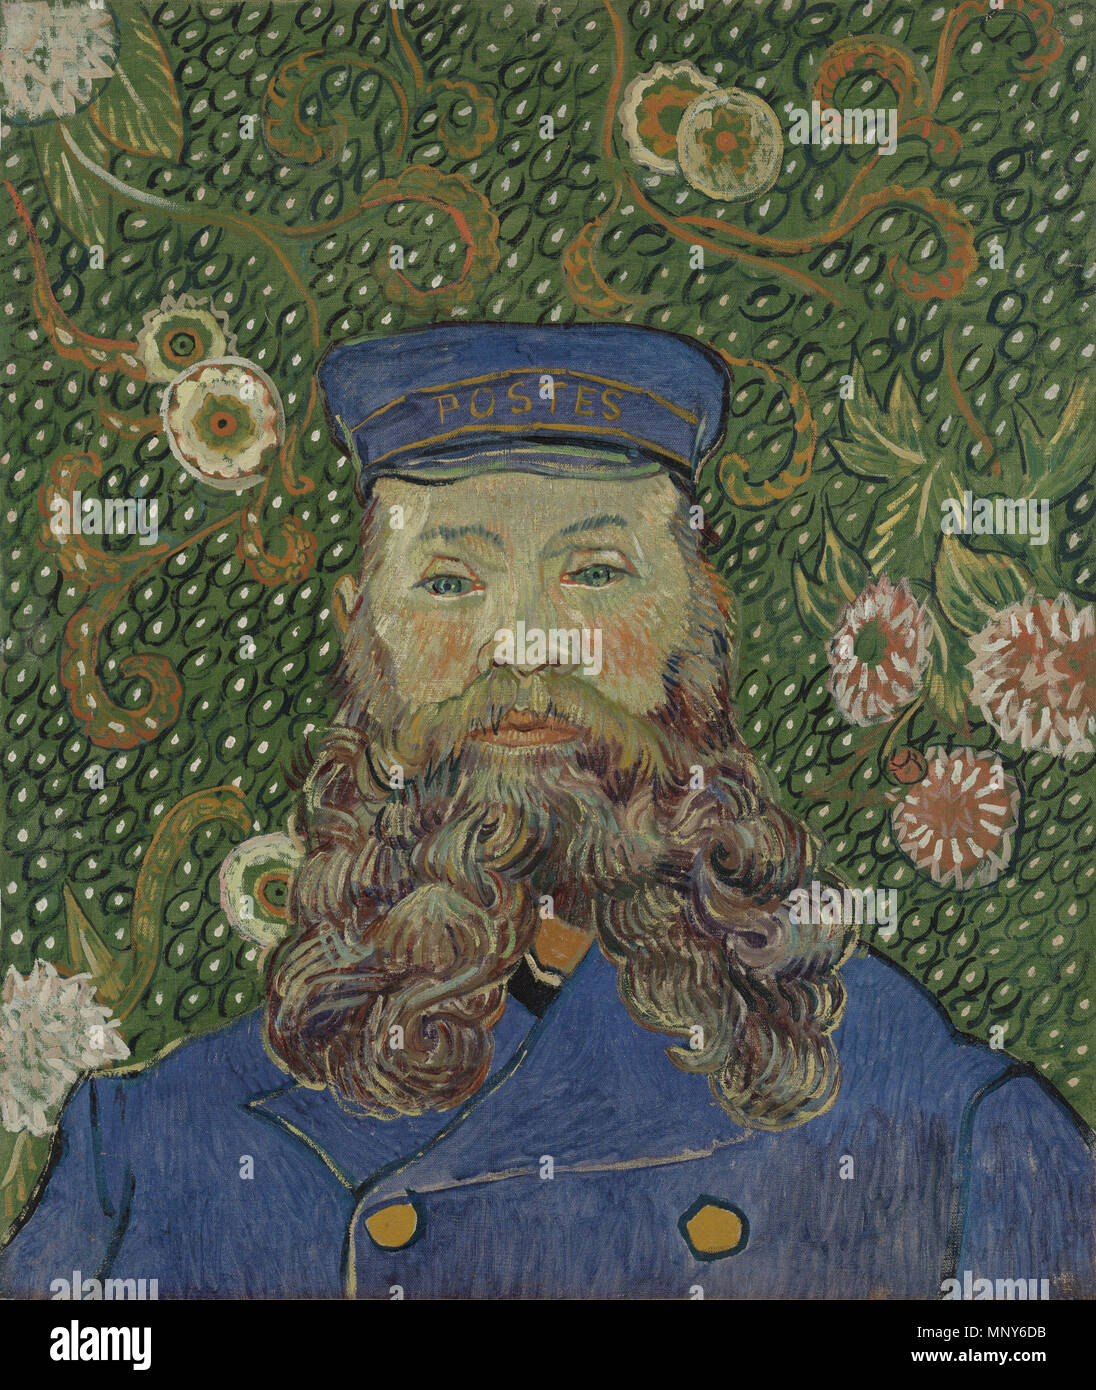 Vincent van Gogh. (Dutch, 1853-1890). Portrait of Joseph Roulin. Arles, early 1889. Oil on canvas, 25 3/8 x 21 3/4' (64.4 x 55.2 cm). Gift of Mr. and Mrs. William A. M. Burden, Mr. and Mrs. Paul Rosenberg,  Nelson A. Rockefeller, Mr. and Mrs. Armand P. Bartos, The Sidney and Harriet Janis Collection, Mr. and Mrs. Werner E. Josten, and Loula D. Lasker Bequest (all by exchange)    English: Portrait of Joseph Roulin   1889.   1238 Vincent van Gogh - Portrait of Joseph Roulin Stock Photo